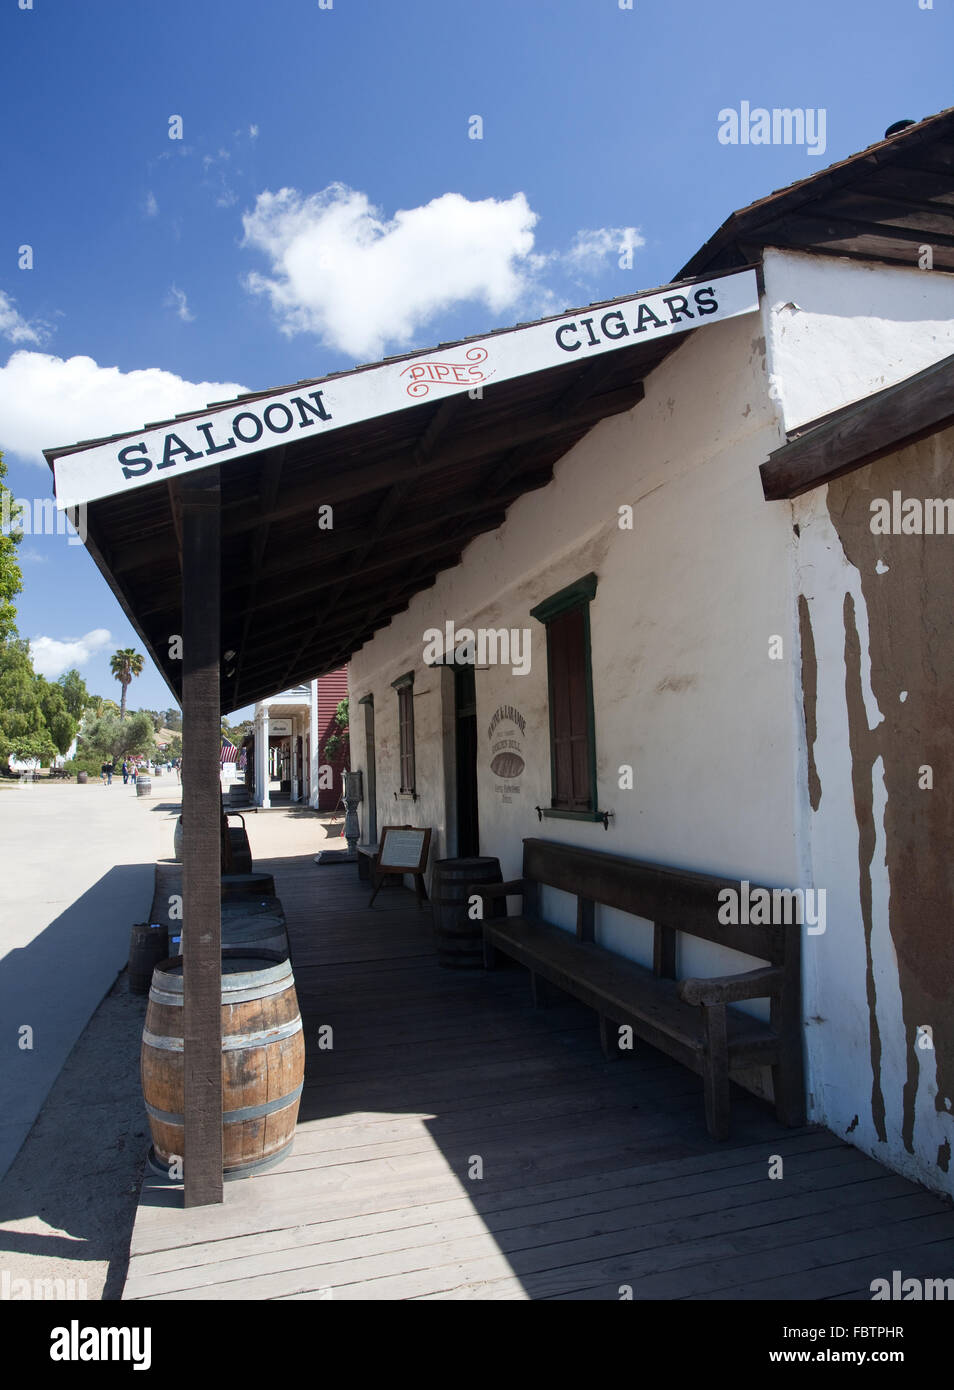 Old Town San Diego showing old saloon with barrels Stock Photo